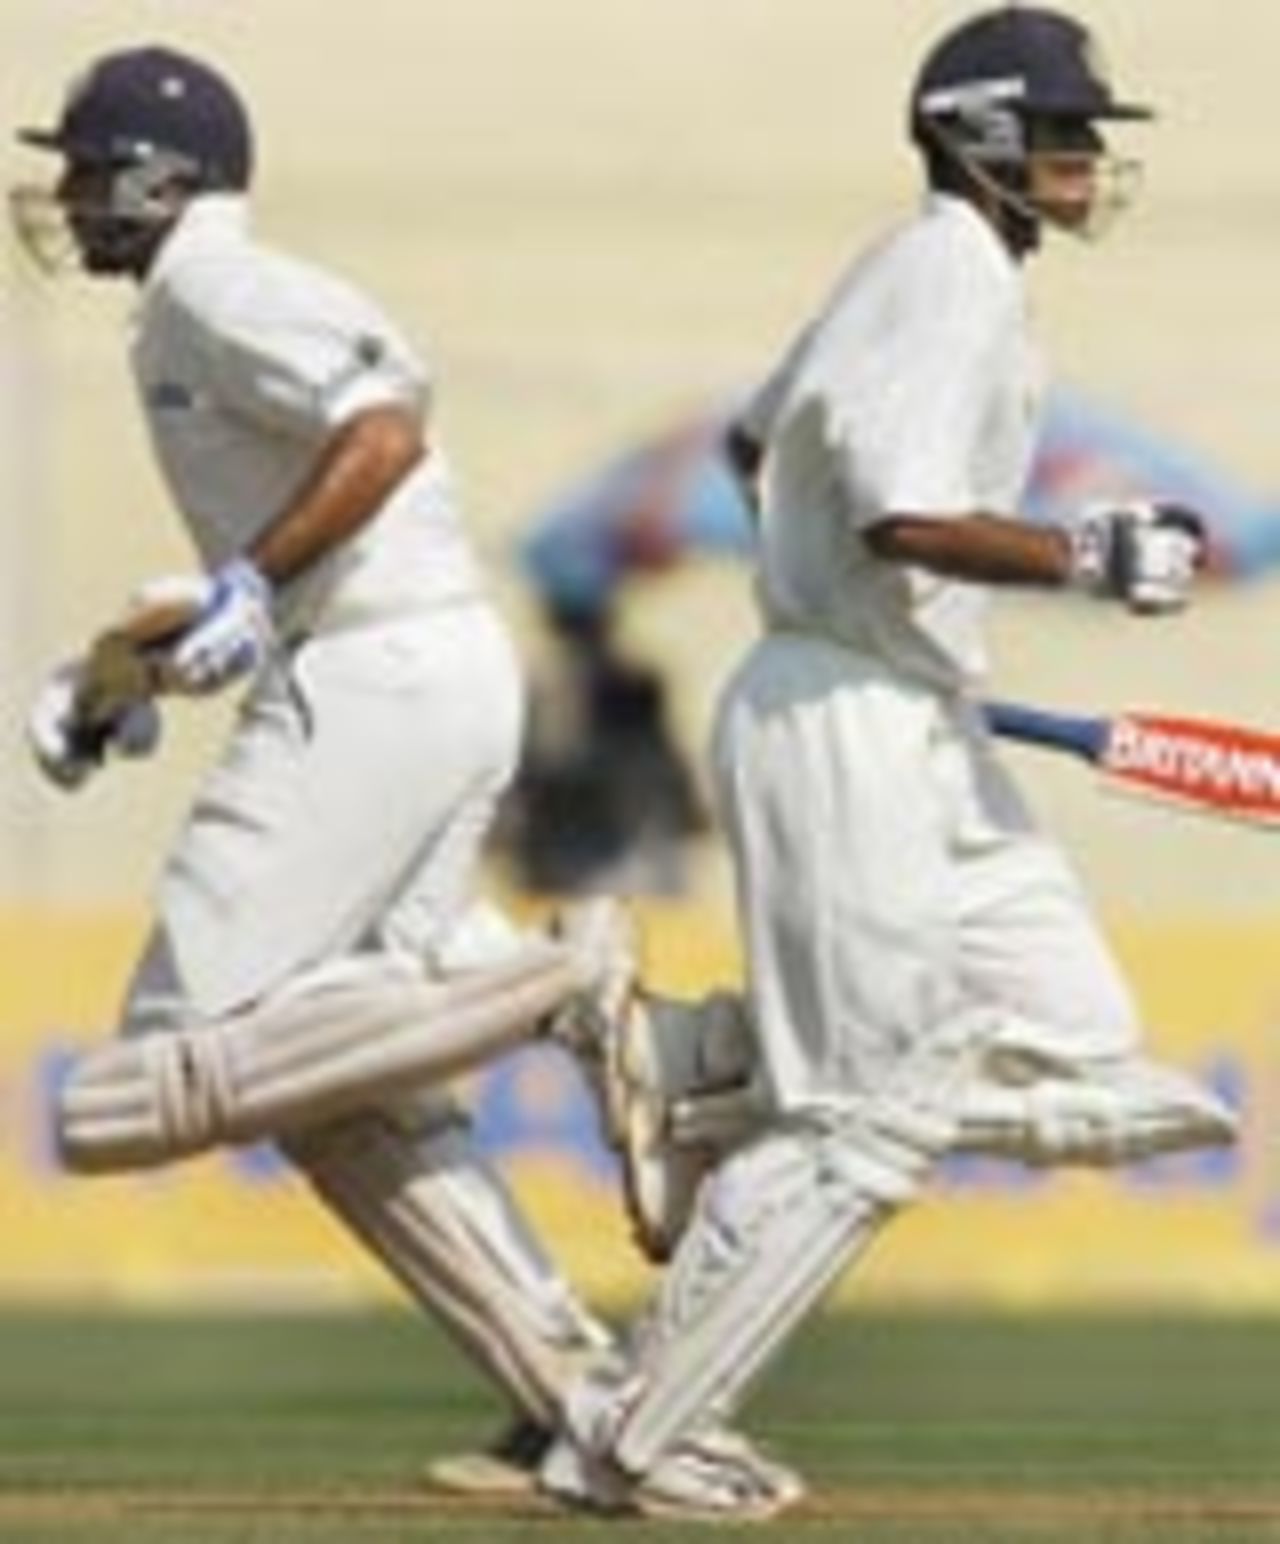 Rahul Dravid and VVS Laxman steal a run during the course of their partnership, India